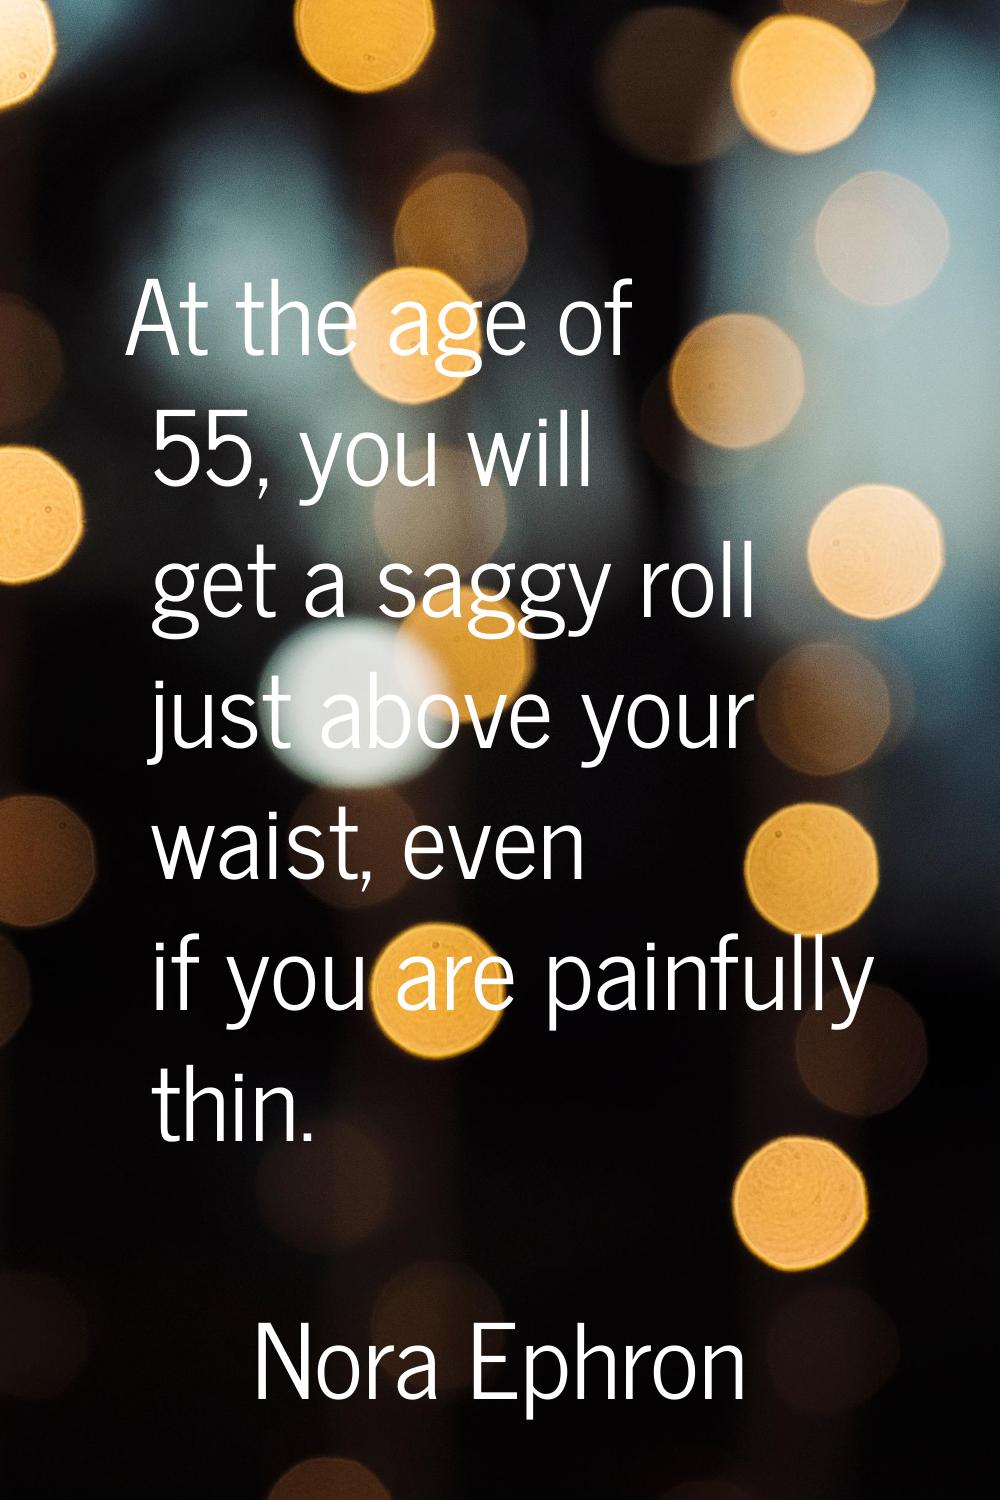 At the age of 55, you will get a saggy roll just above your waist, even if you are painfully thin.